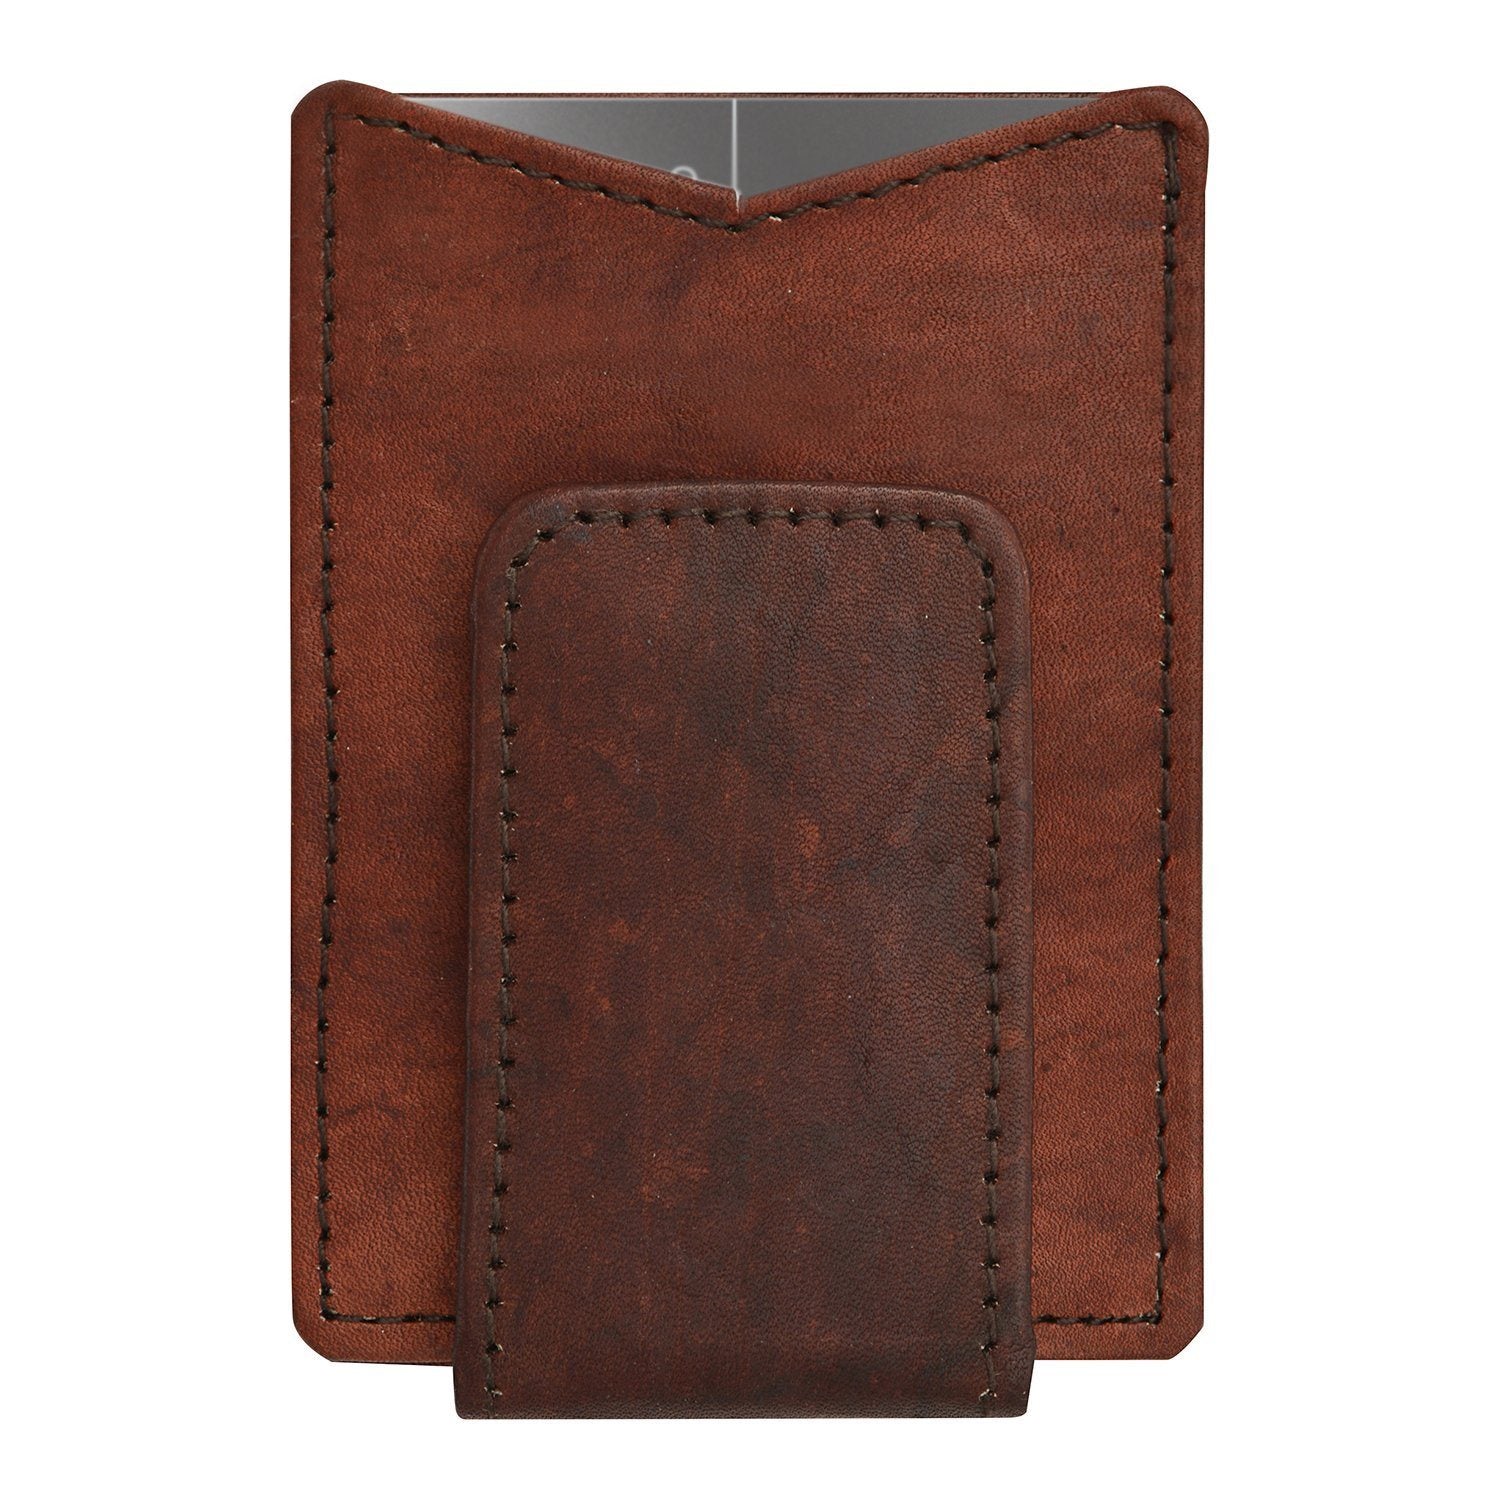 AFONiE Magnetic Leather Money Clip